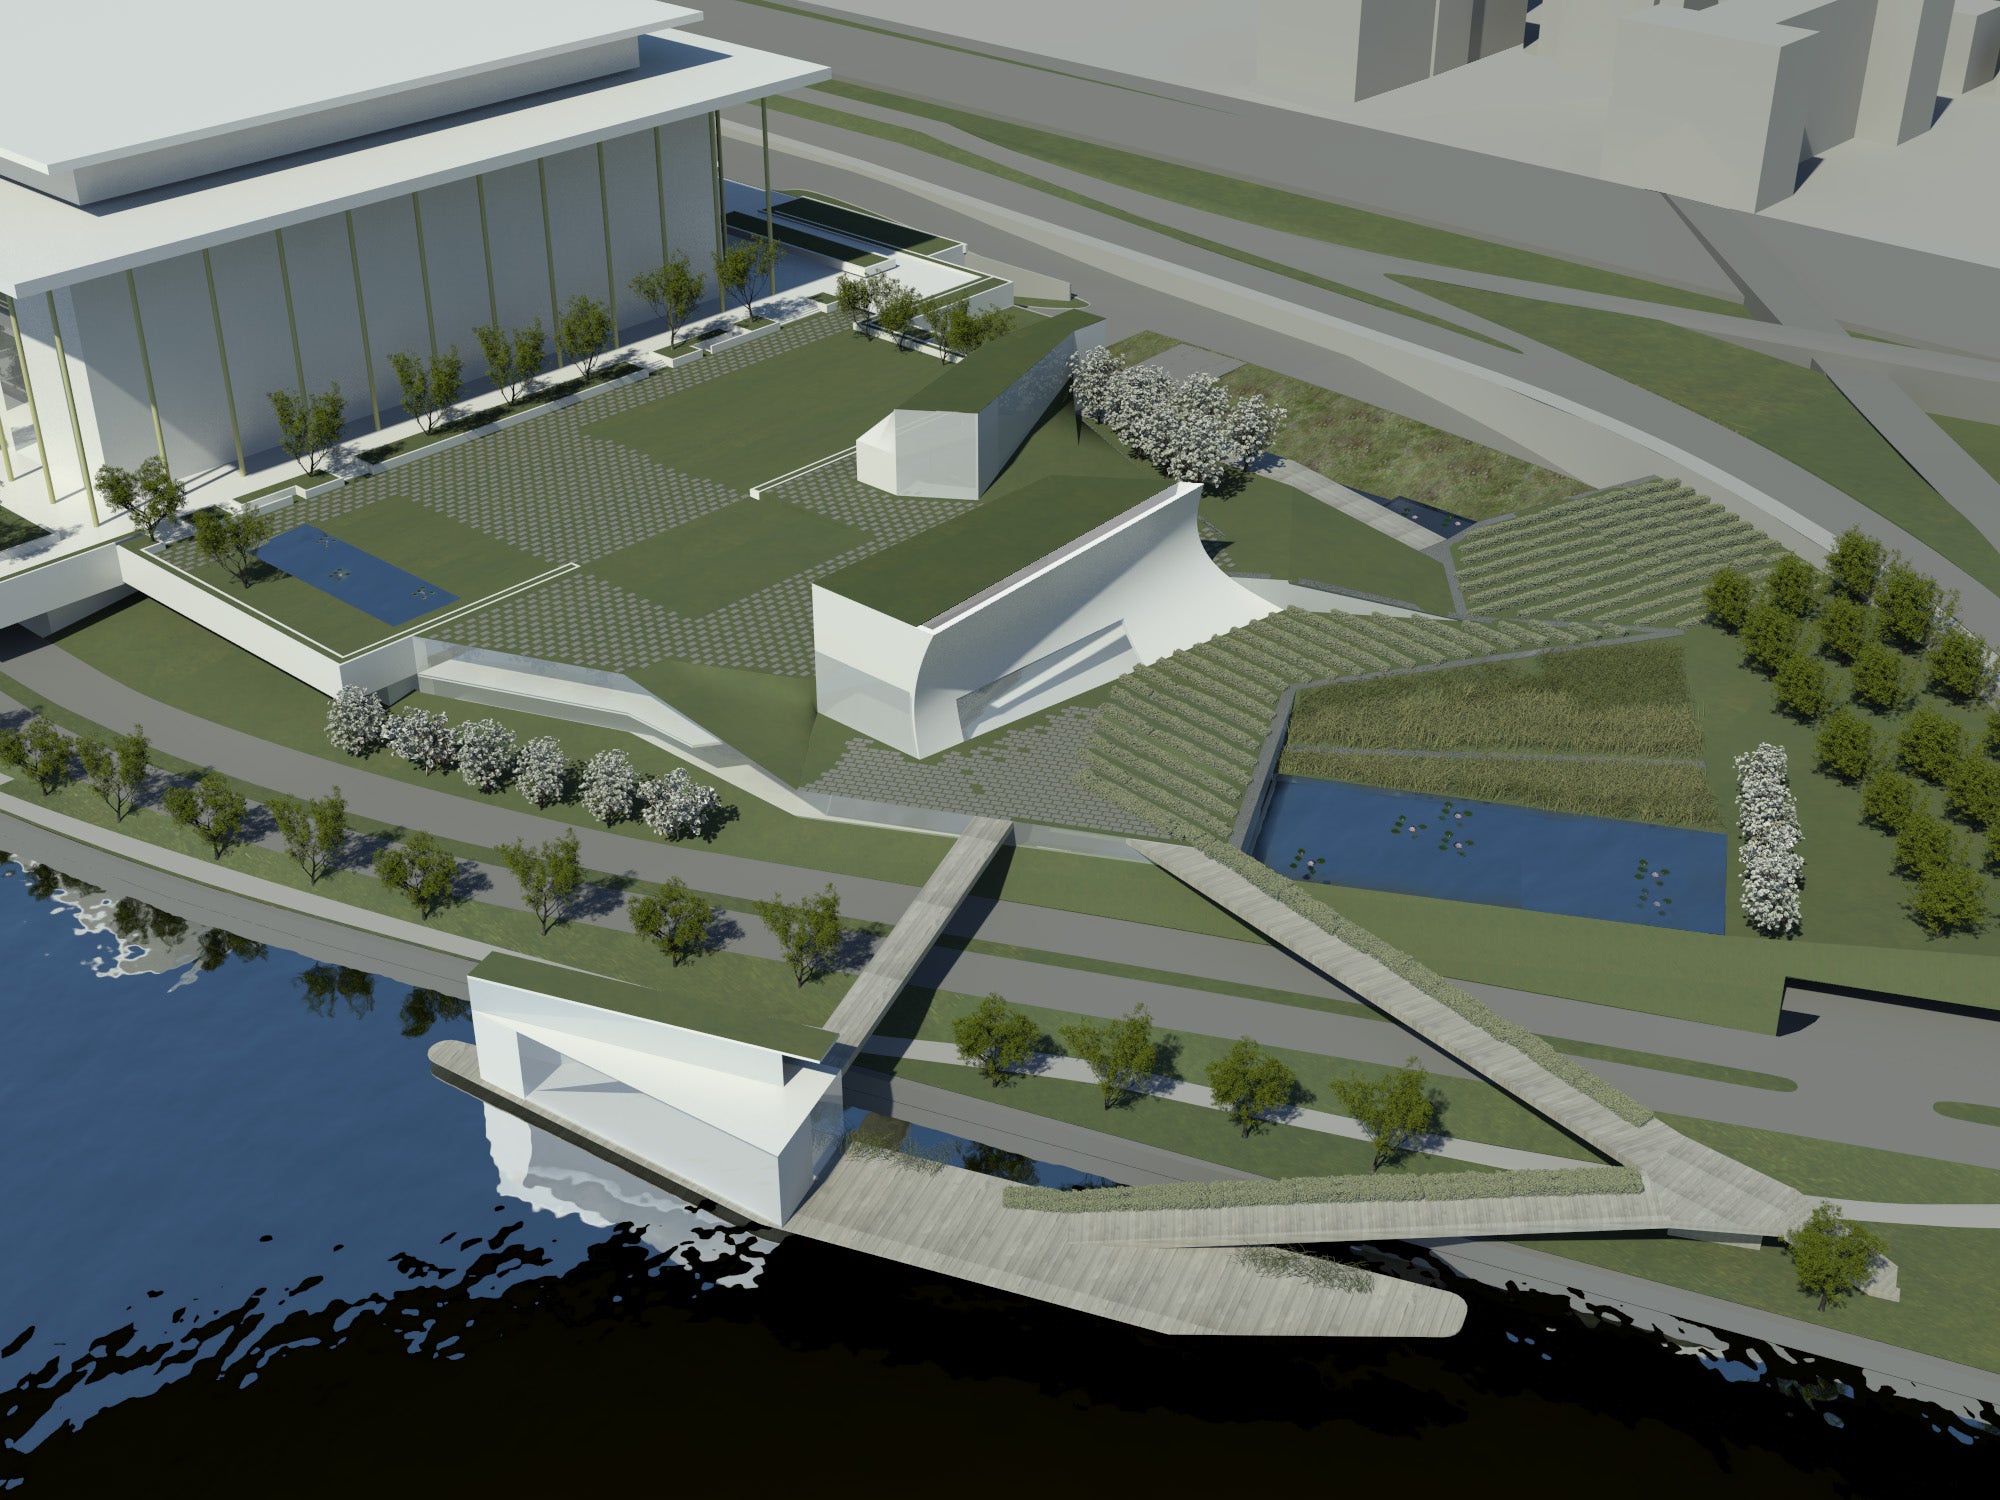 Kennedy Center for Performing Arts planning a 100 million addition